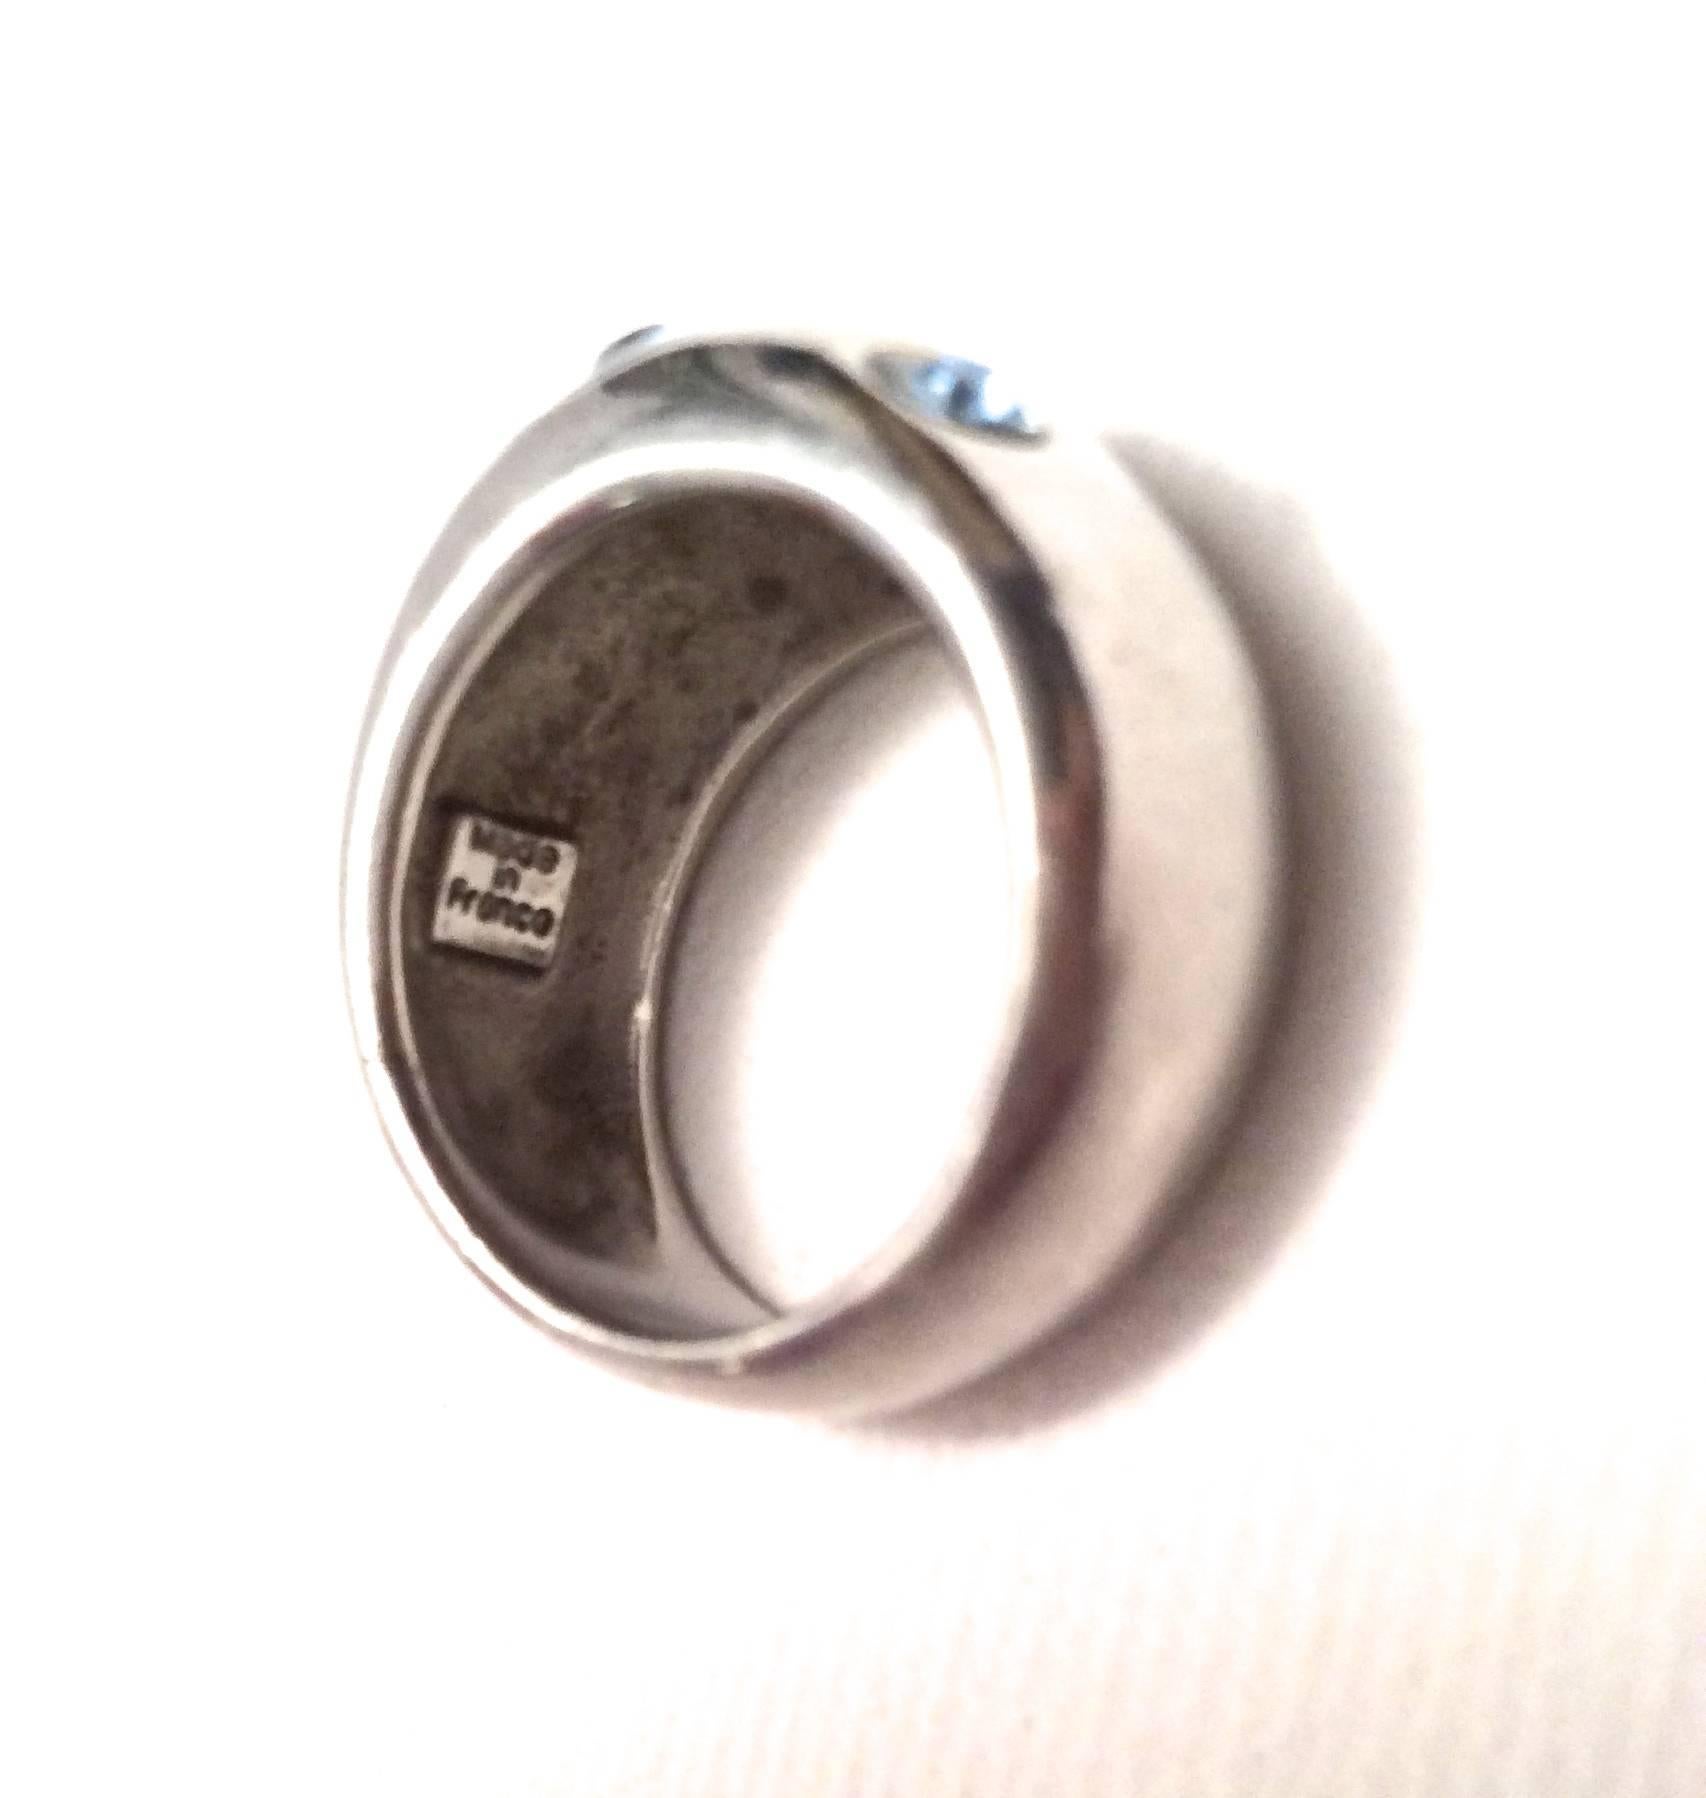 This is a lovely sterling silver Yves Saint Laurent ring in size 5.5. It is signed on the inside with the YSL logo. The ring is a dome shape which comprises 7 light blue colored Swarovski crystal stones. It is from the 1980's and is very unusual to